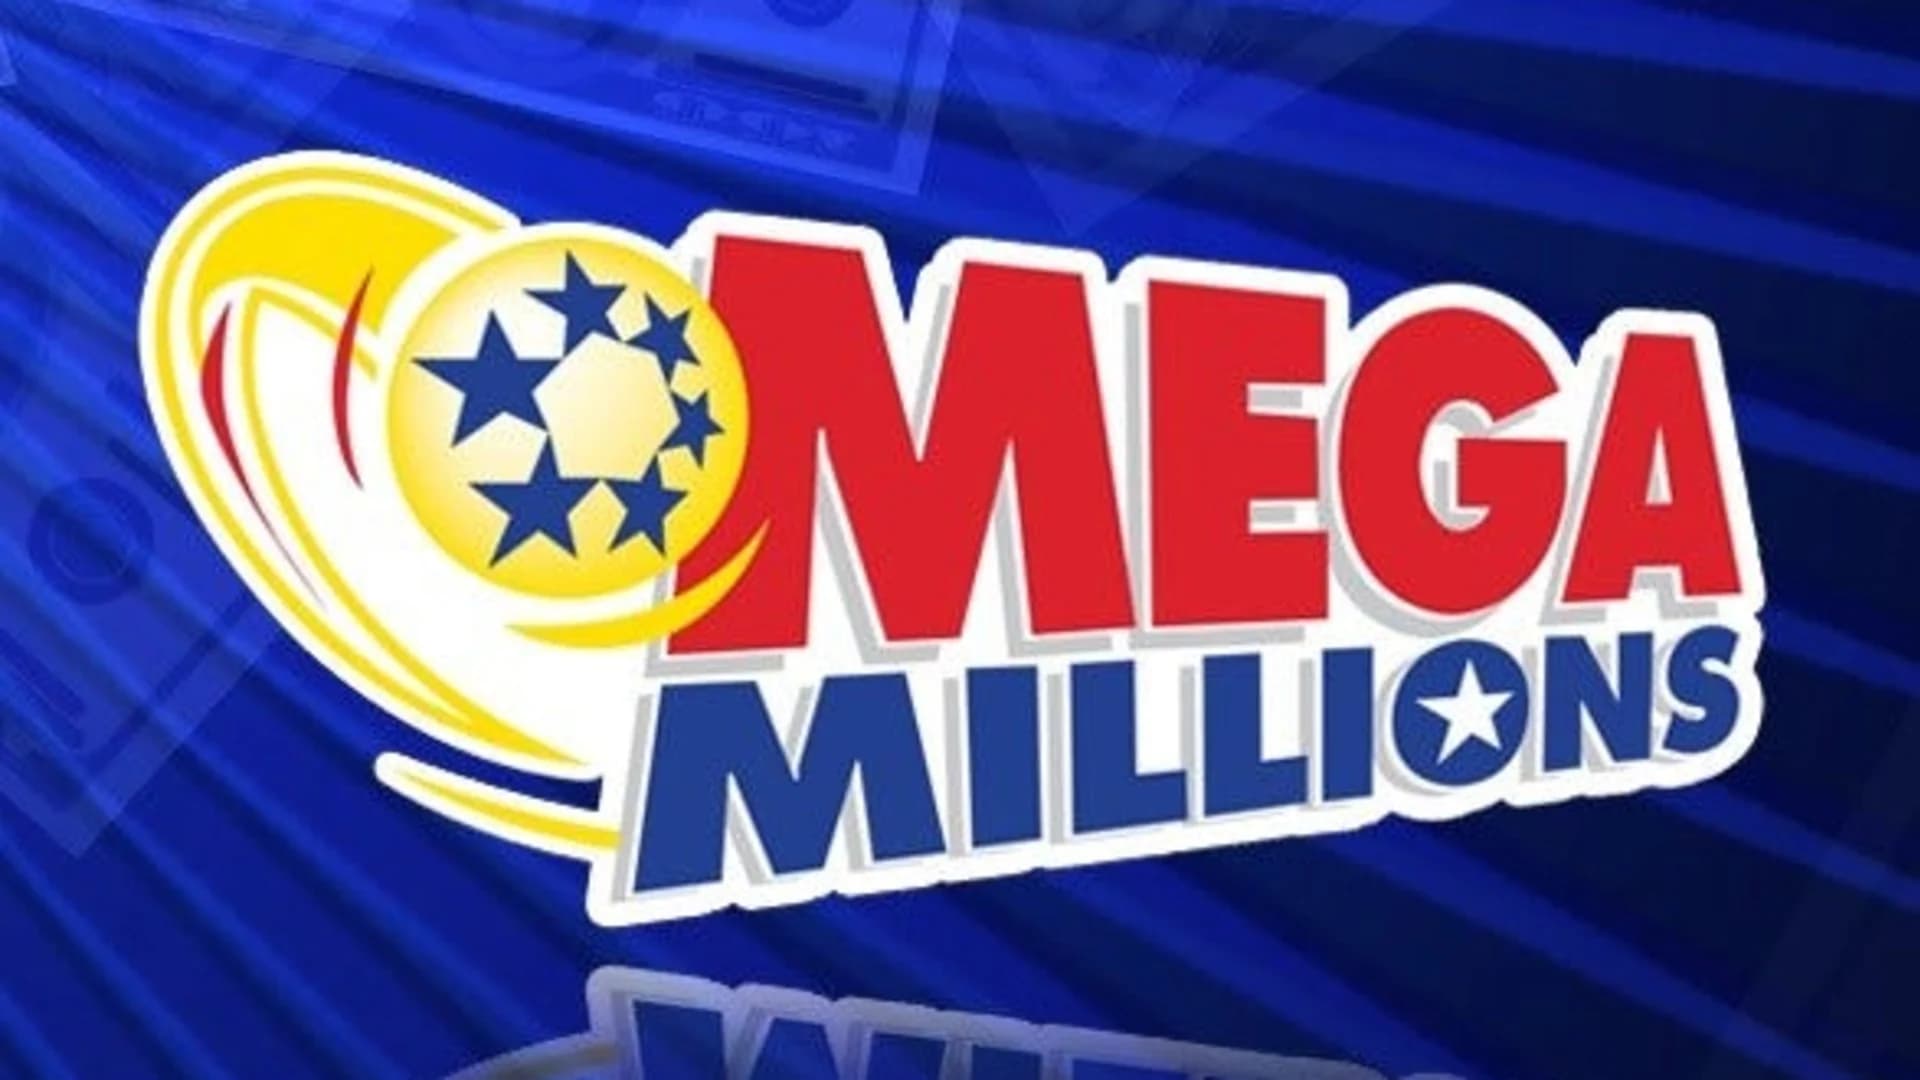 Check your tickets – 3 Mega Millions tickets worth $10,000 sold in New Jersey